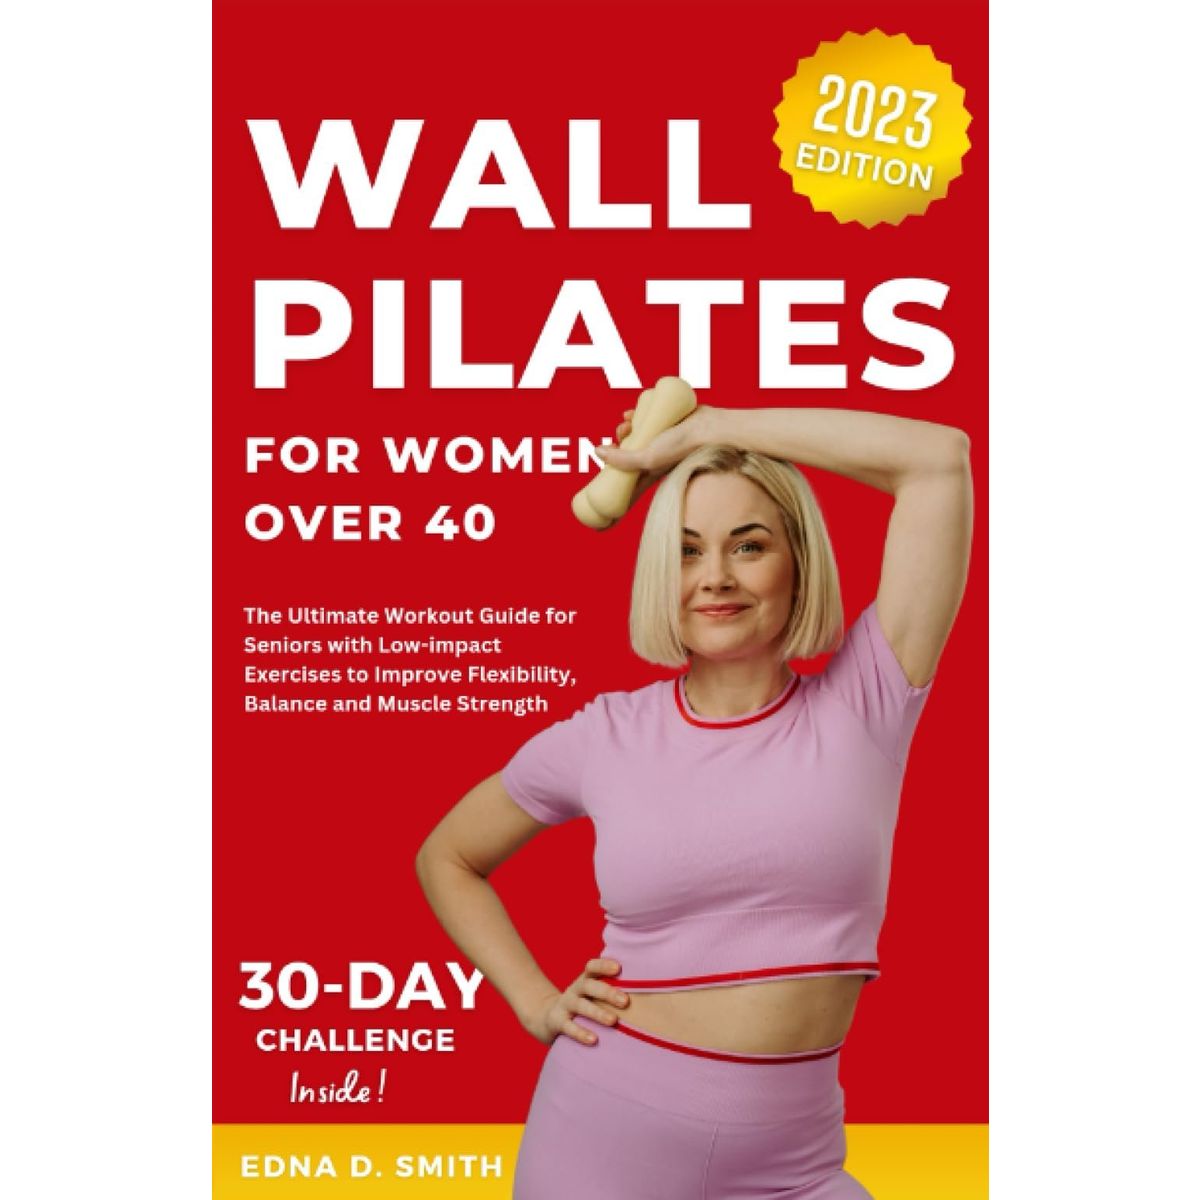 Wall Pilate for Seniors: Unlock Your Strength and Flexibility with